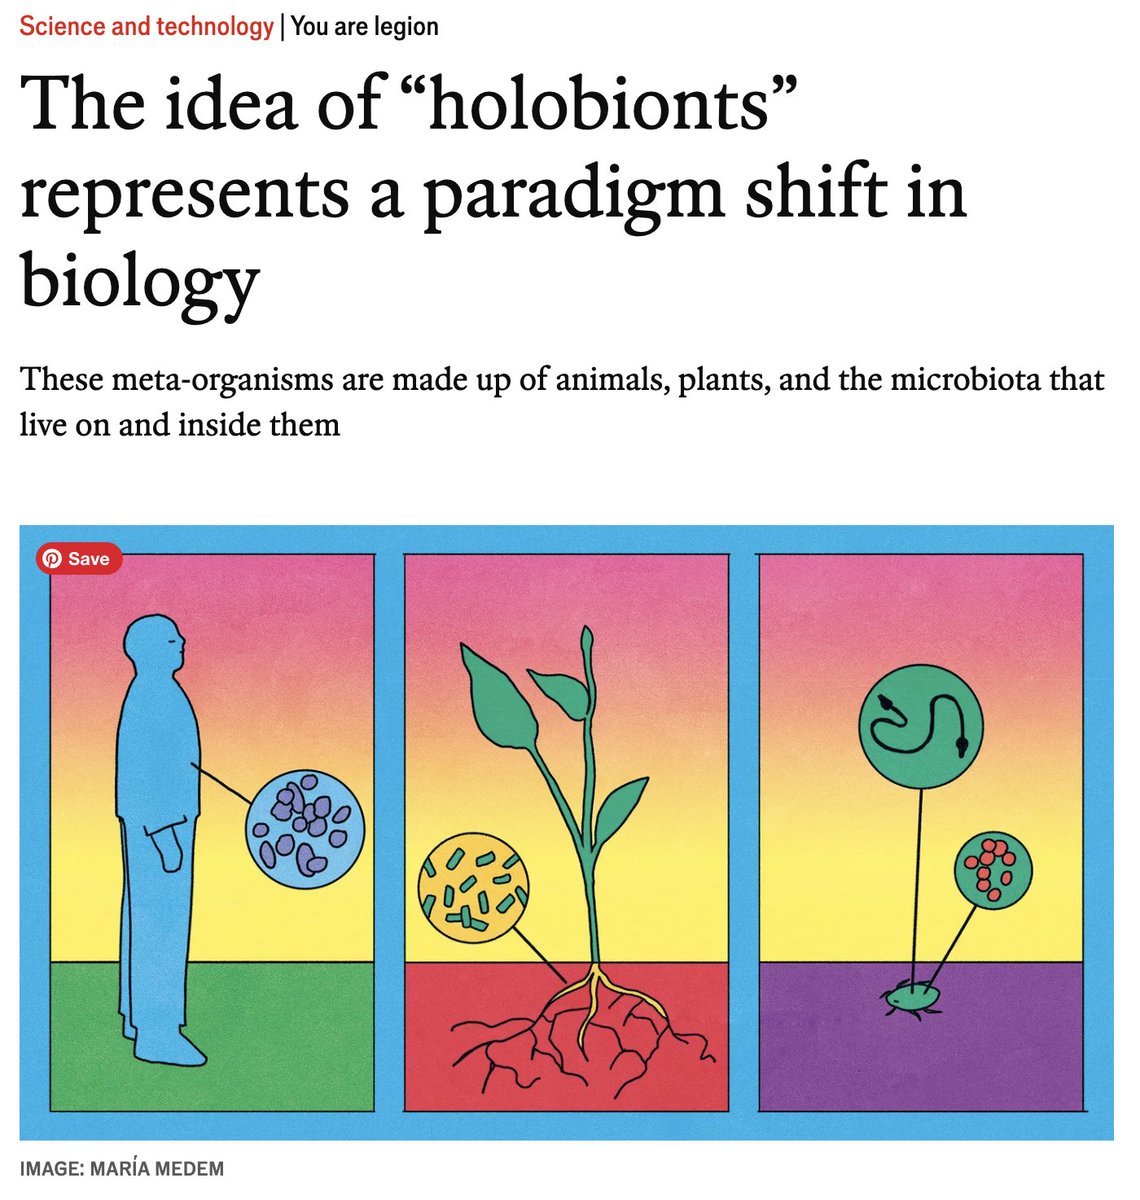 Holobionts - critical new addition to my vocab thanks to @curiousceros, who points out that we inhabit a holobiont of homo sapiens + memes